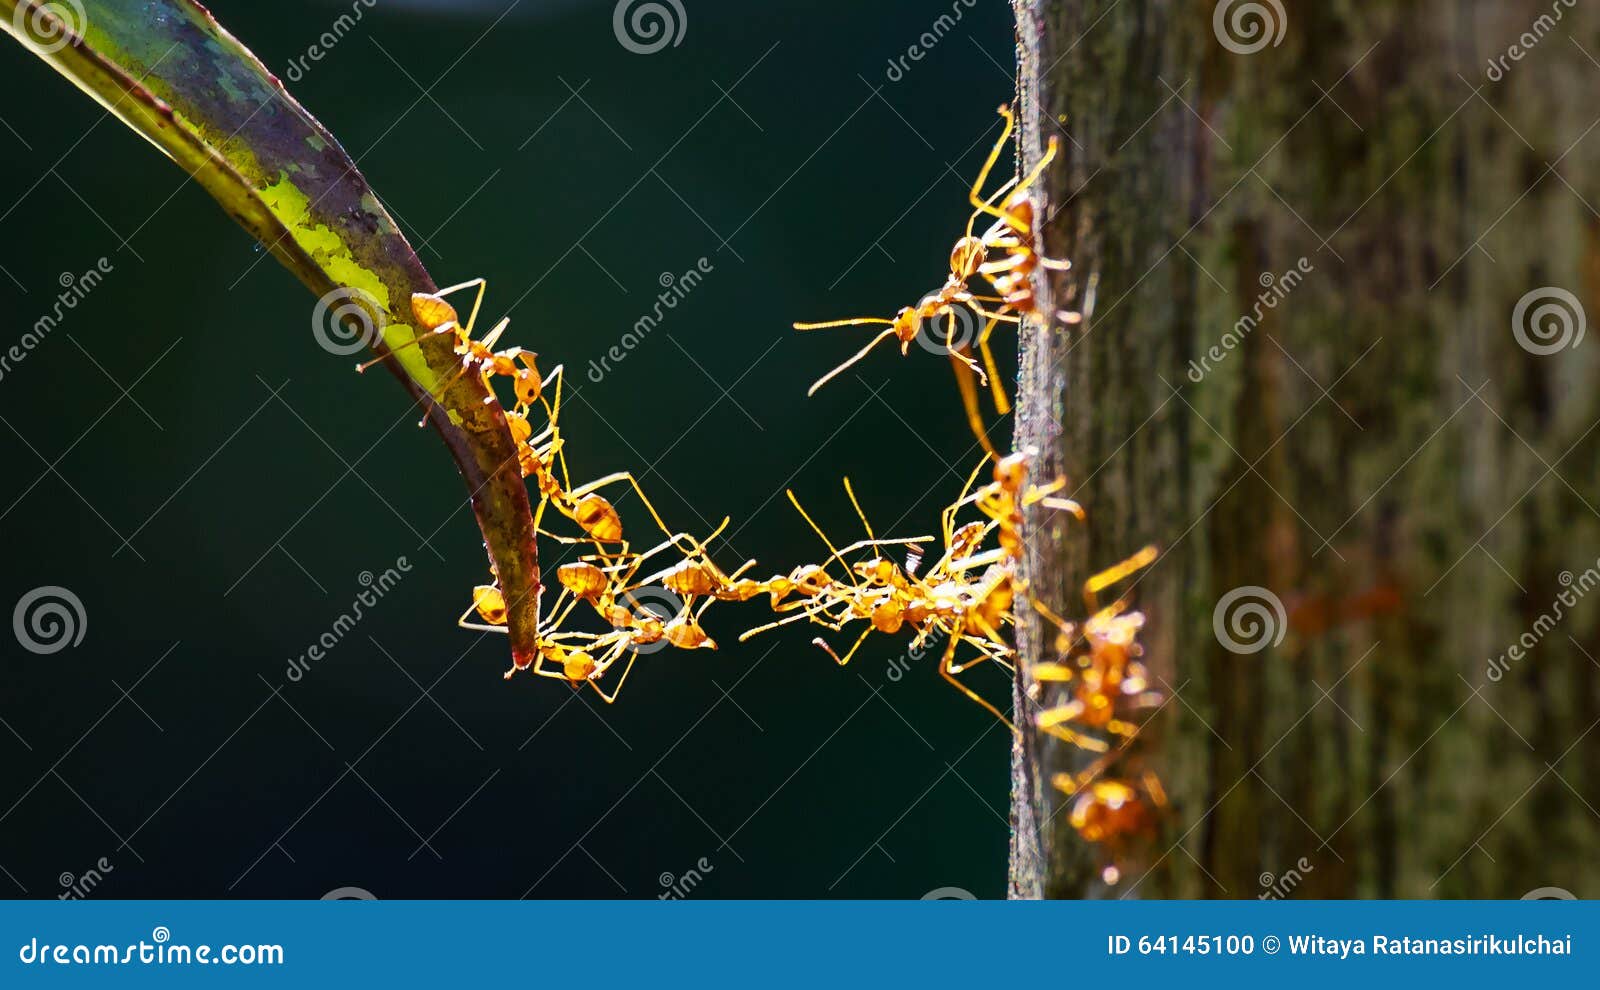 close up of ants making bridge with their bodies